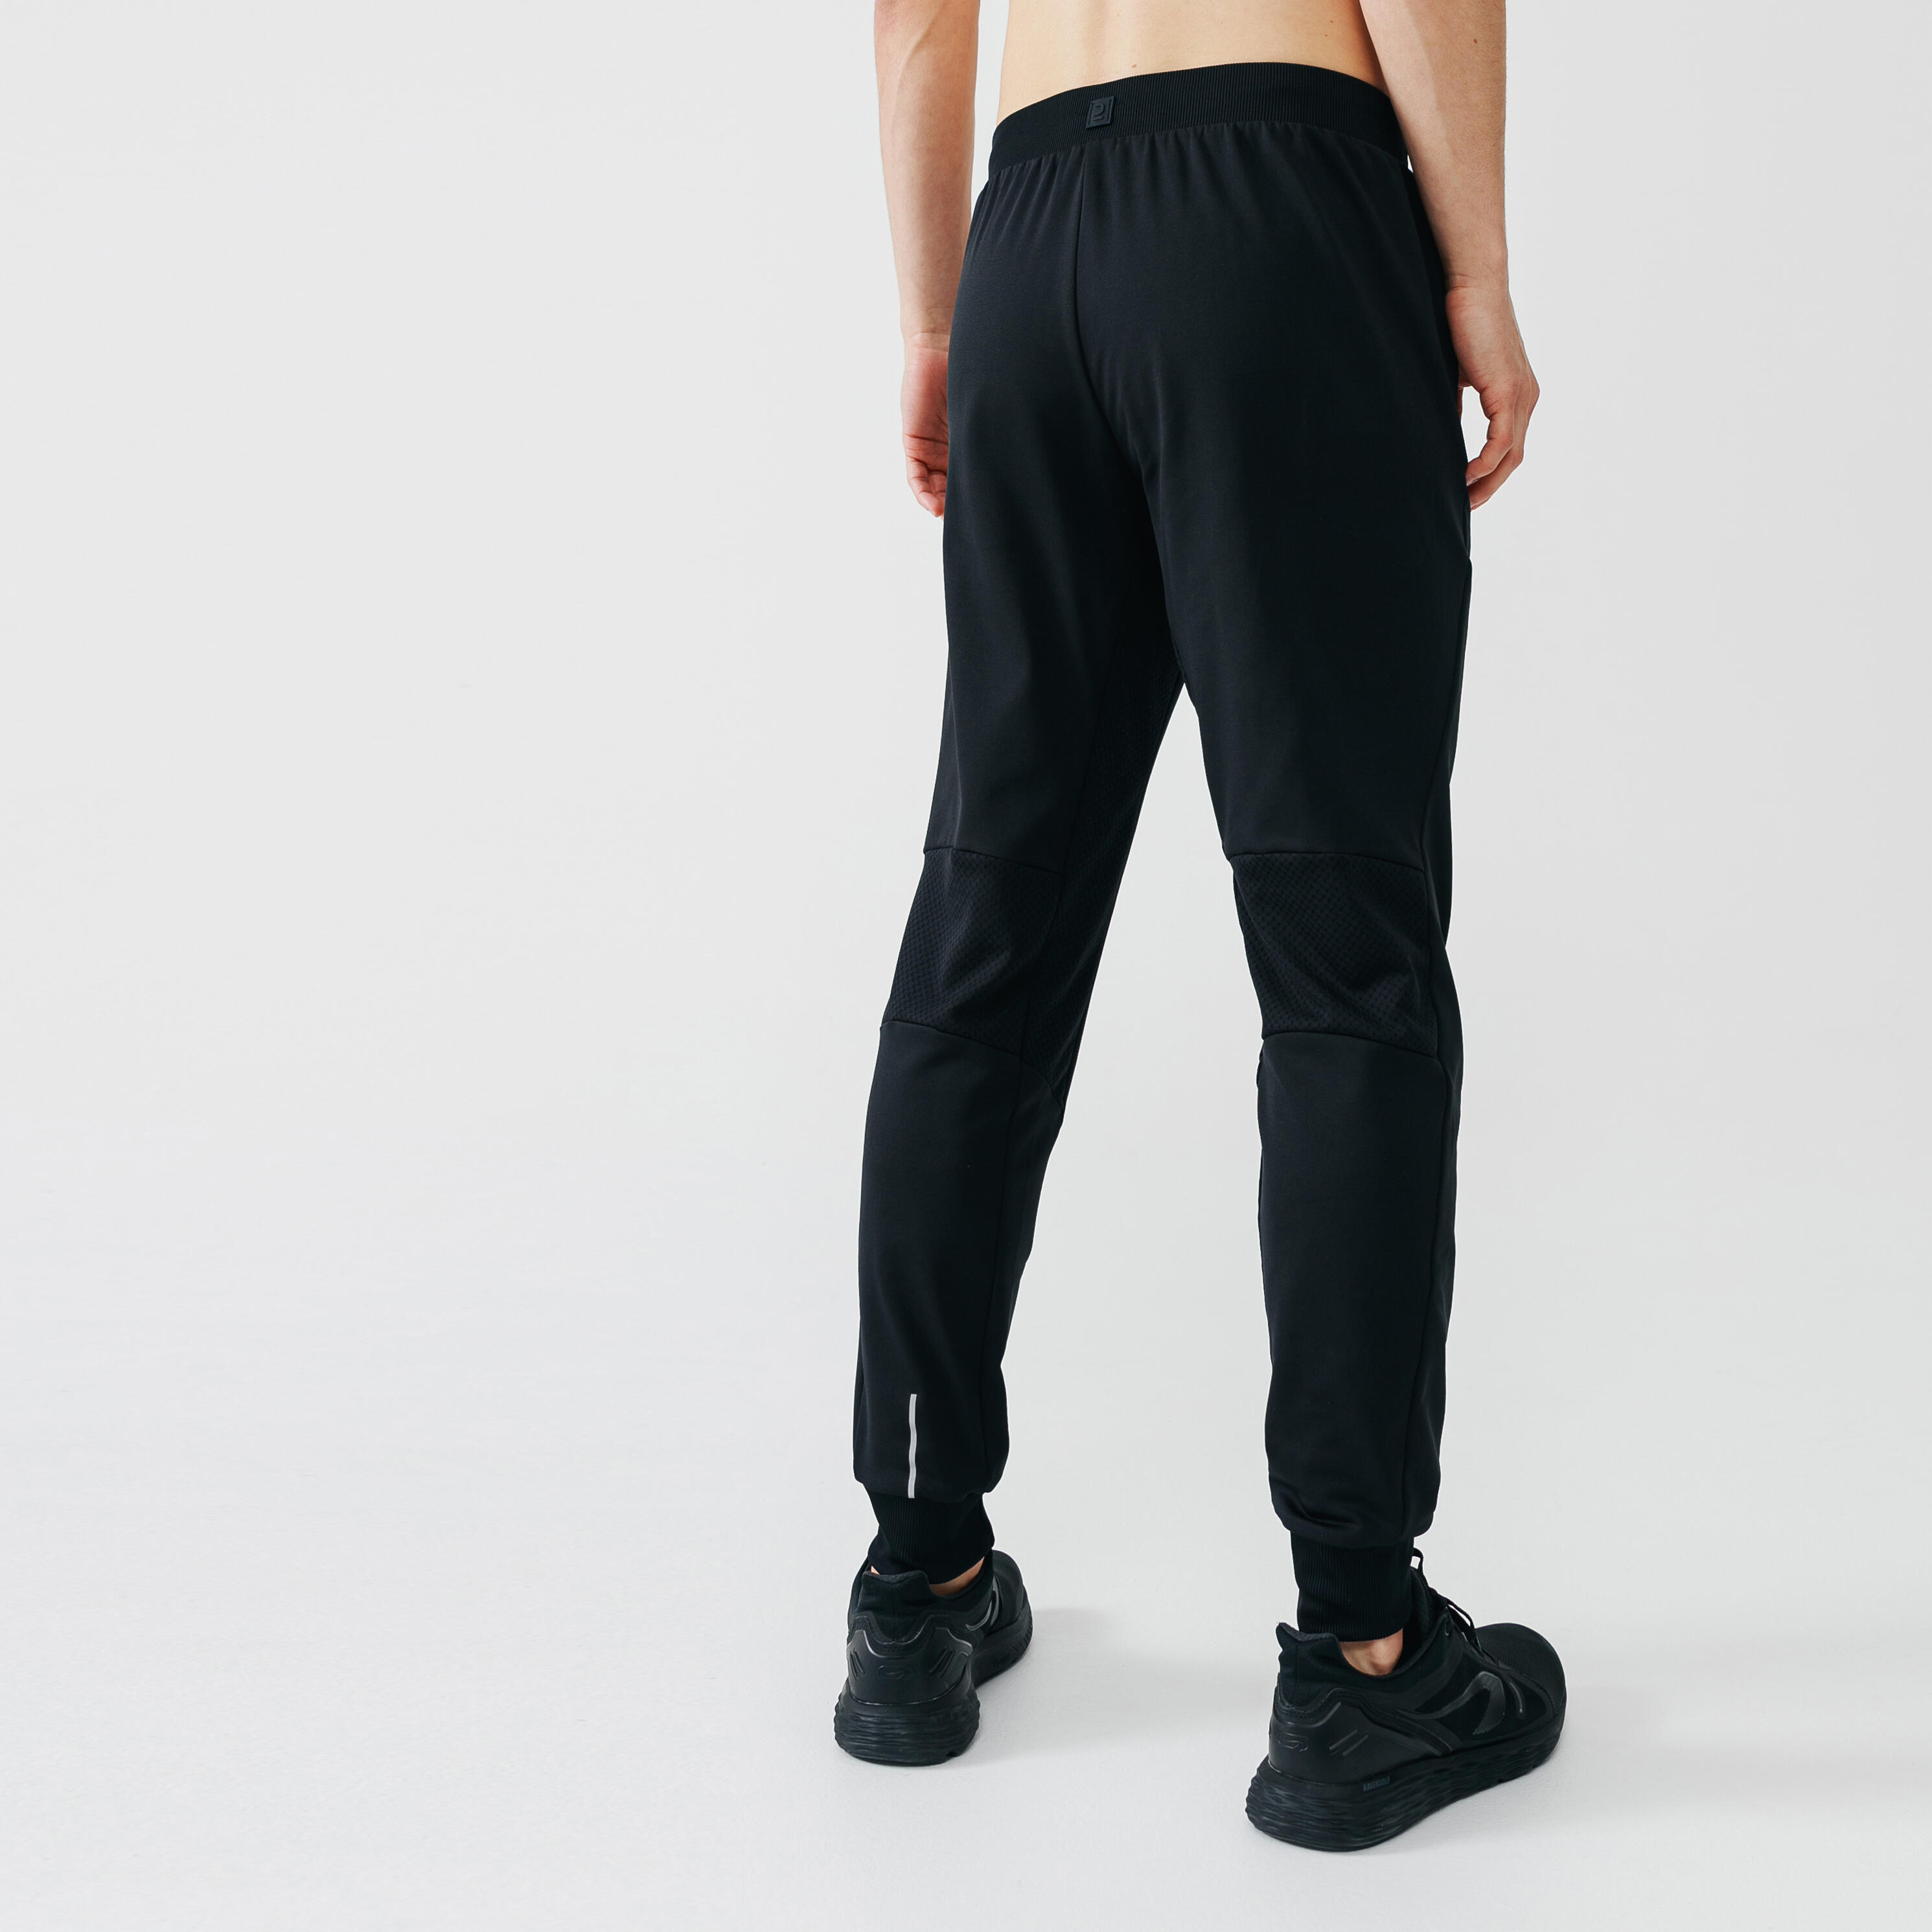 MEN'S ATHLETIC ZIPPED TROUSERS AT 900M